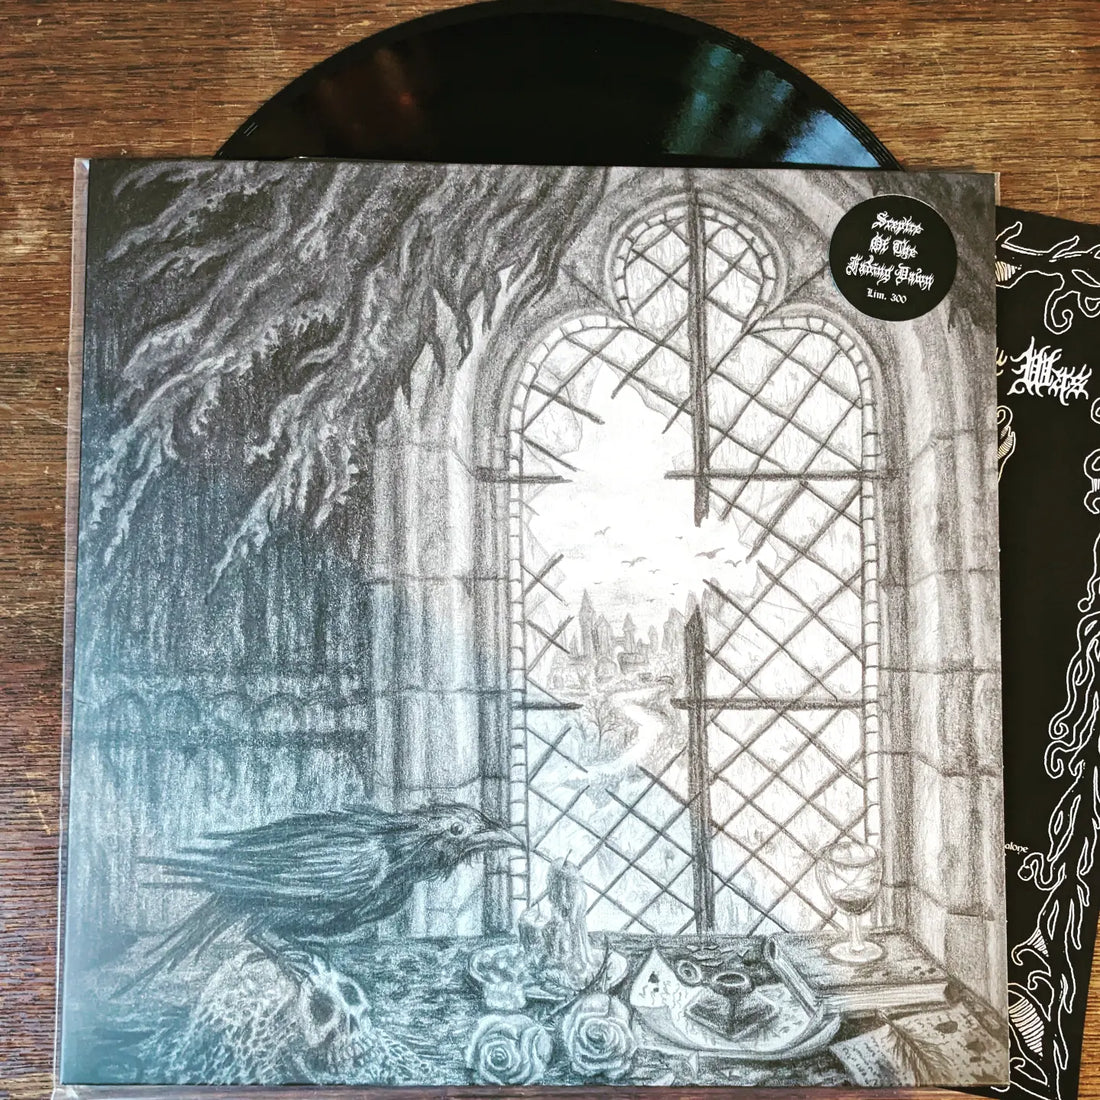 SCEPTRE OF THE FADING DAWN vinyl out now